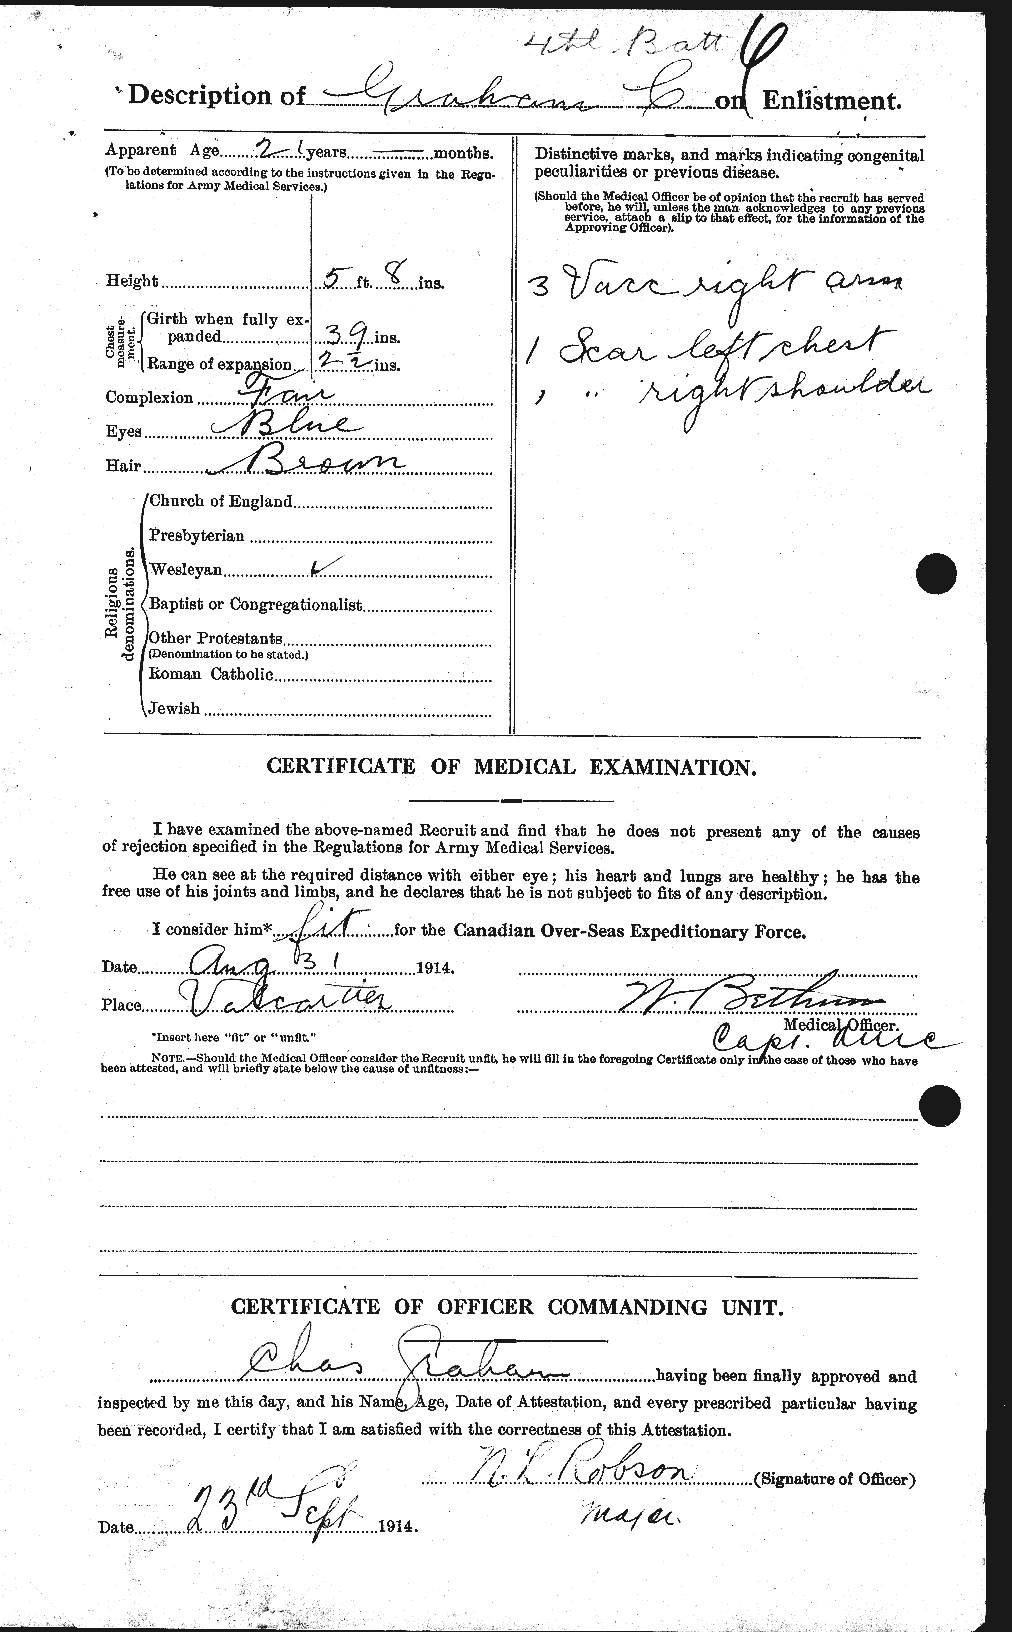 Personnel Records of the First World War - CEF 359698b